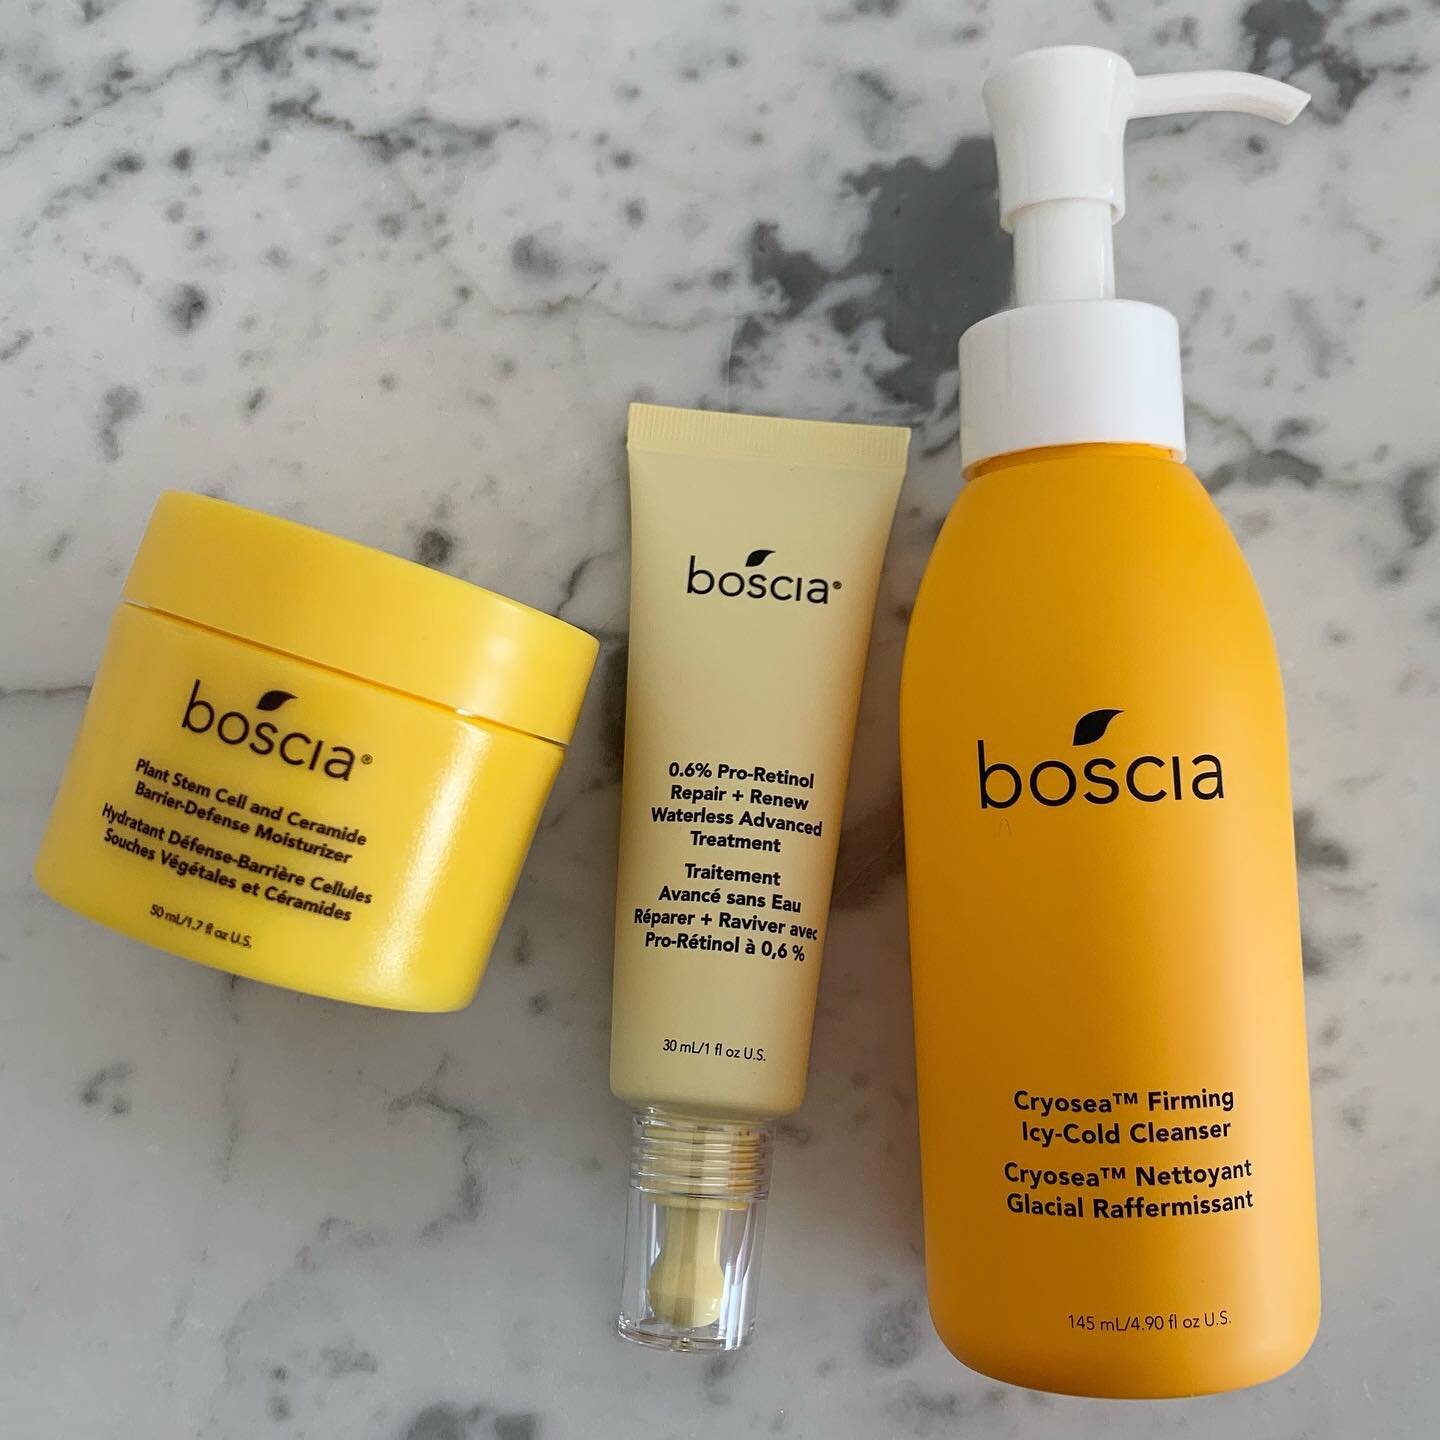 ✨GIVEAWAY✨ We&rsquo;re hosting another client giveaway! This time with @boscia giving one of you all 3 products shown here!
To Enter
✨ follow @boscia and @blendprcom 
✨ like this photo 
✨ tag a friend who you like would also like boscia (tag as many 